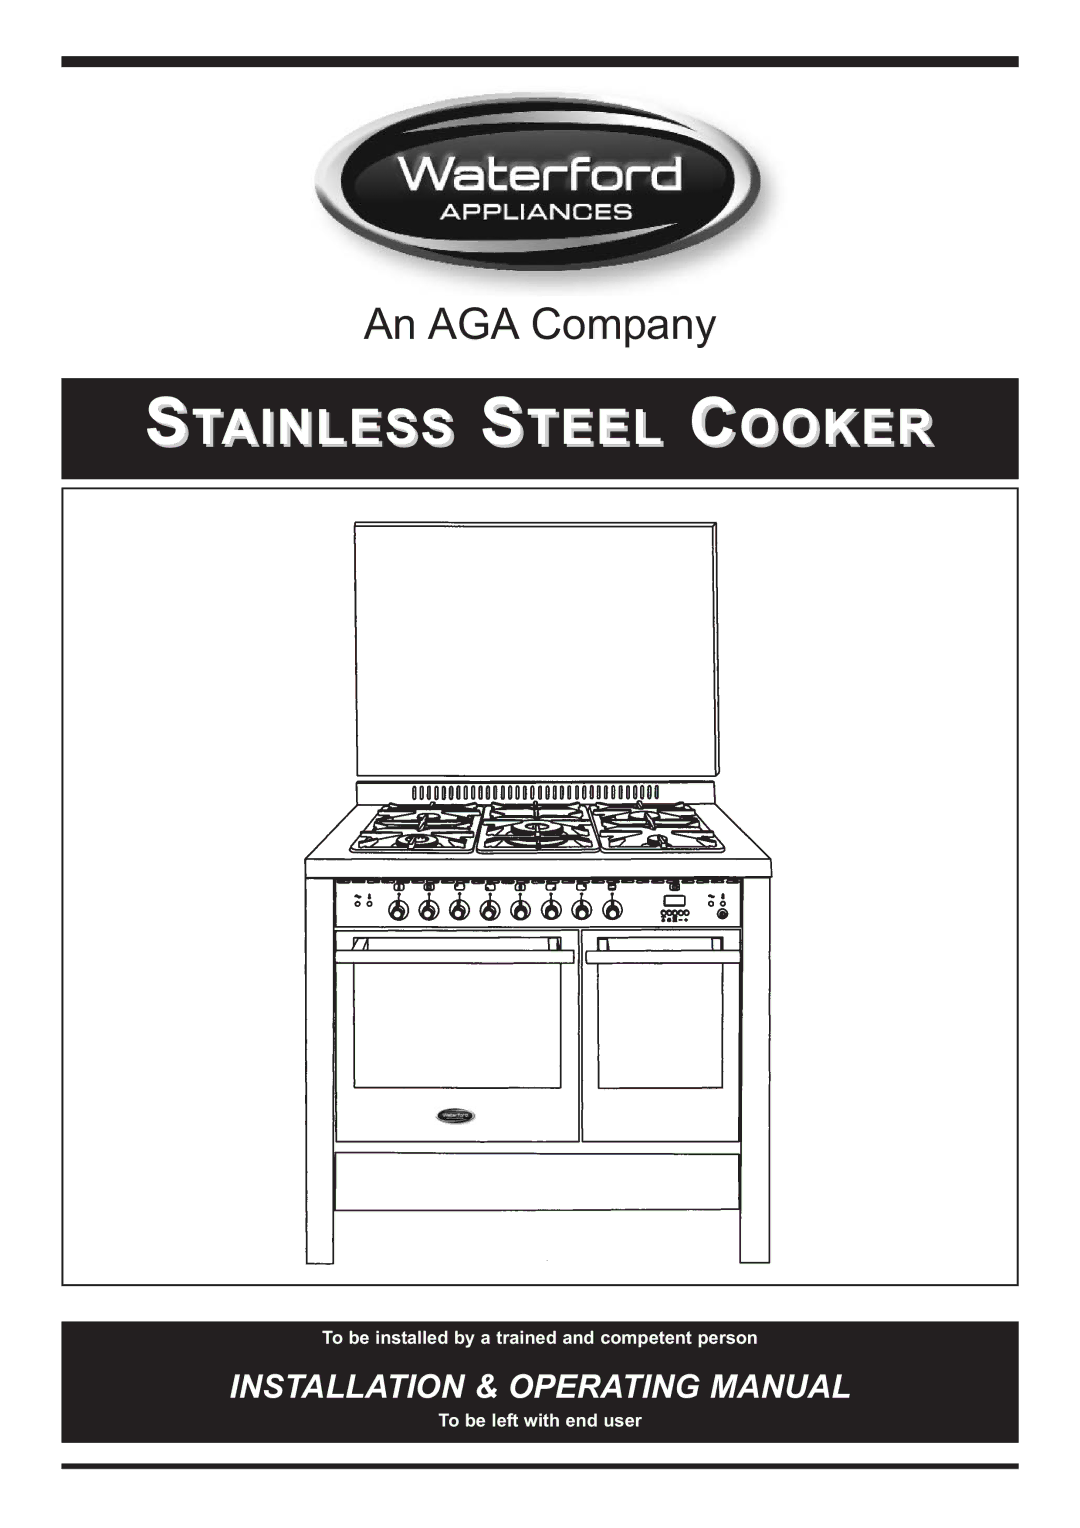 Waterford Appliances Stainless Stell Cooker manual Stainless Steel Cooker 